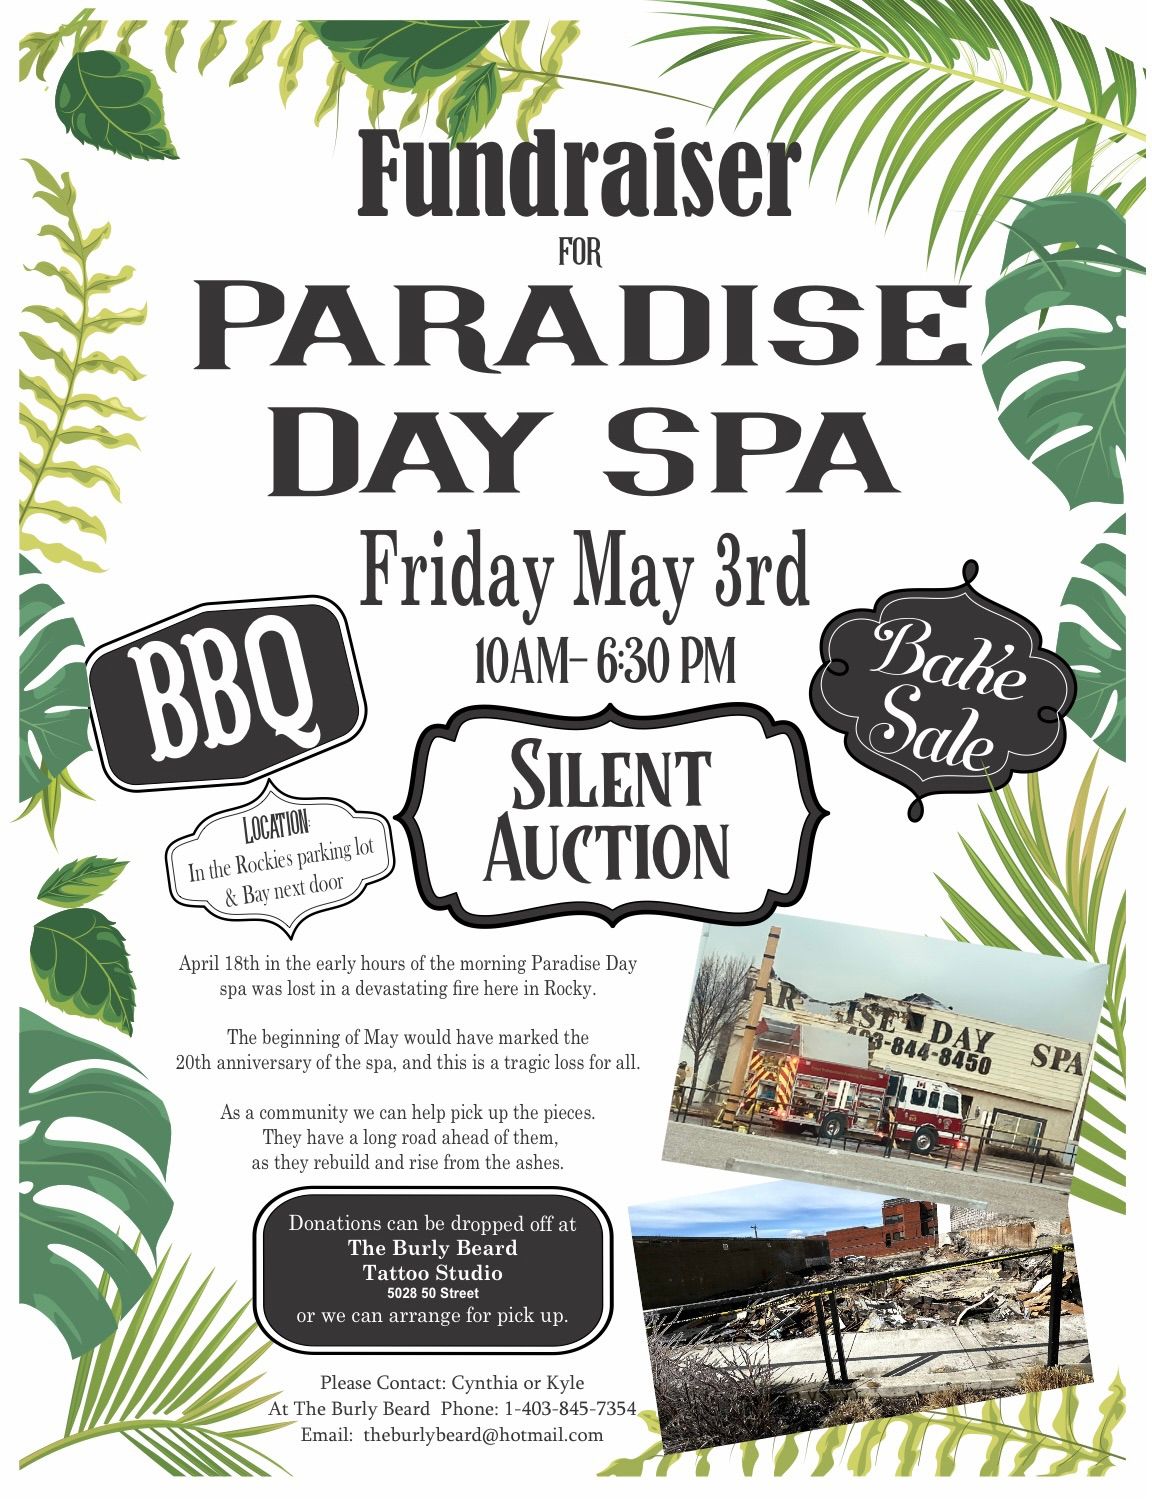 Silent Auction & BBQ for Paradise Day Spa